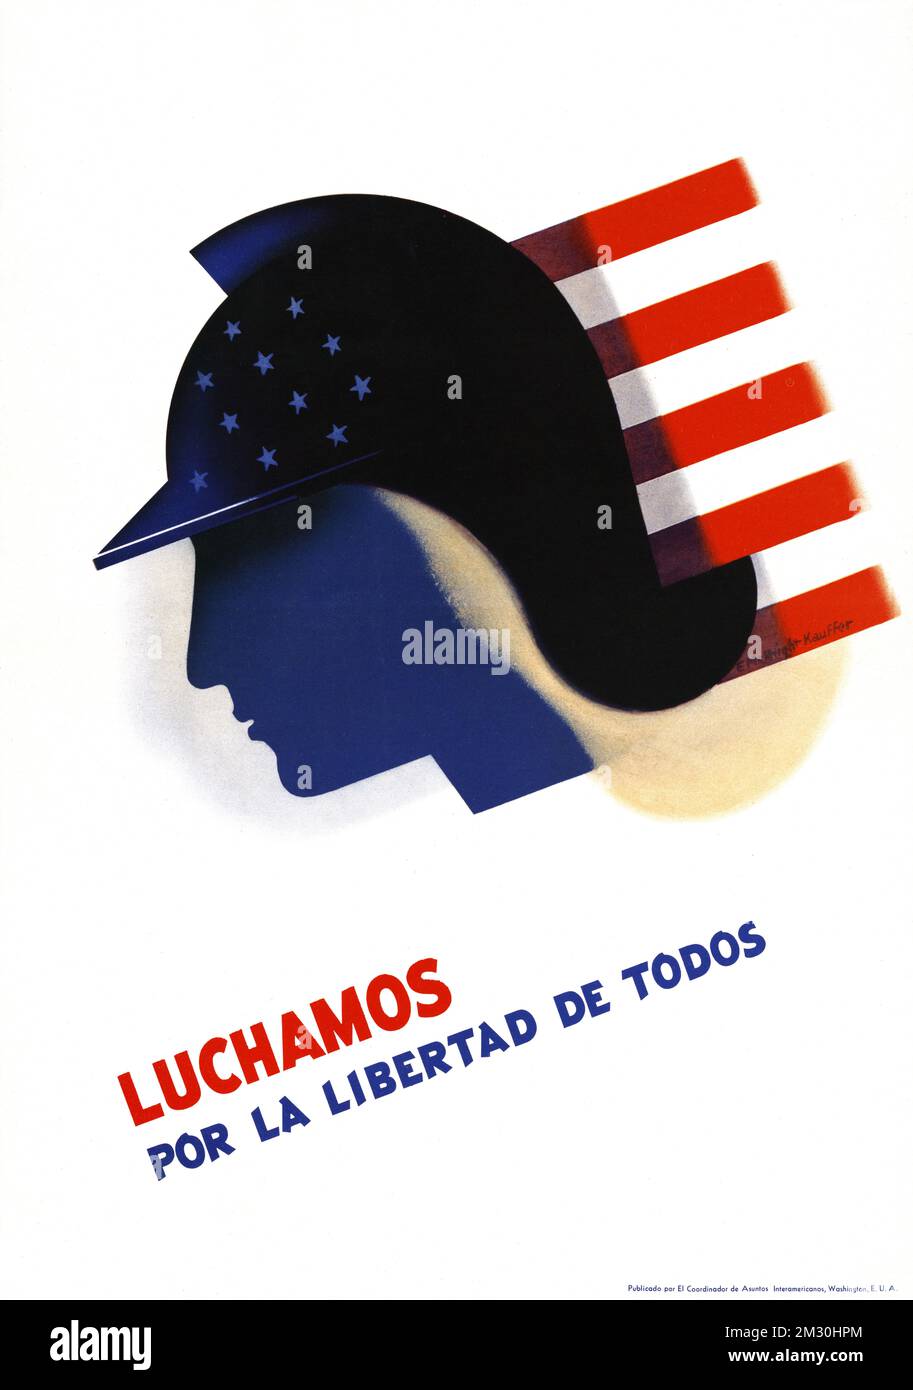 http://hdl.loc.gov/loc.pnp/ppmsca.42753 'Luchamos por la libertad de todos' ('We fight for the freedom of all') WWII poster - Poster by Edward McKnigh Stock Photo